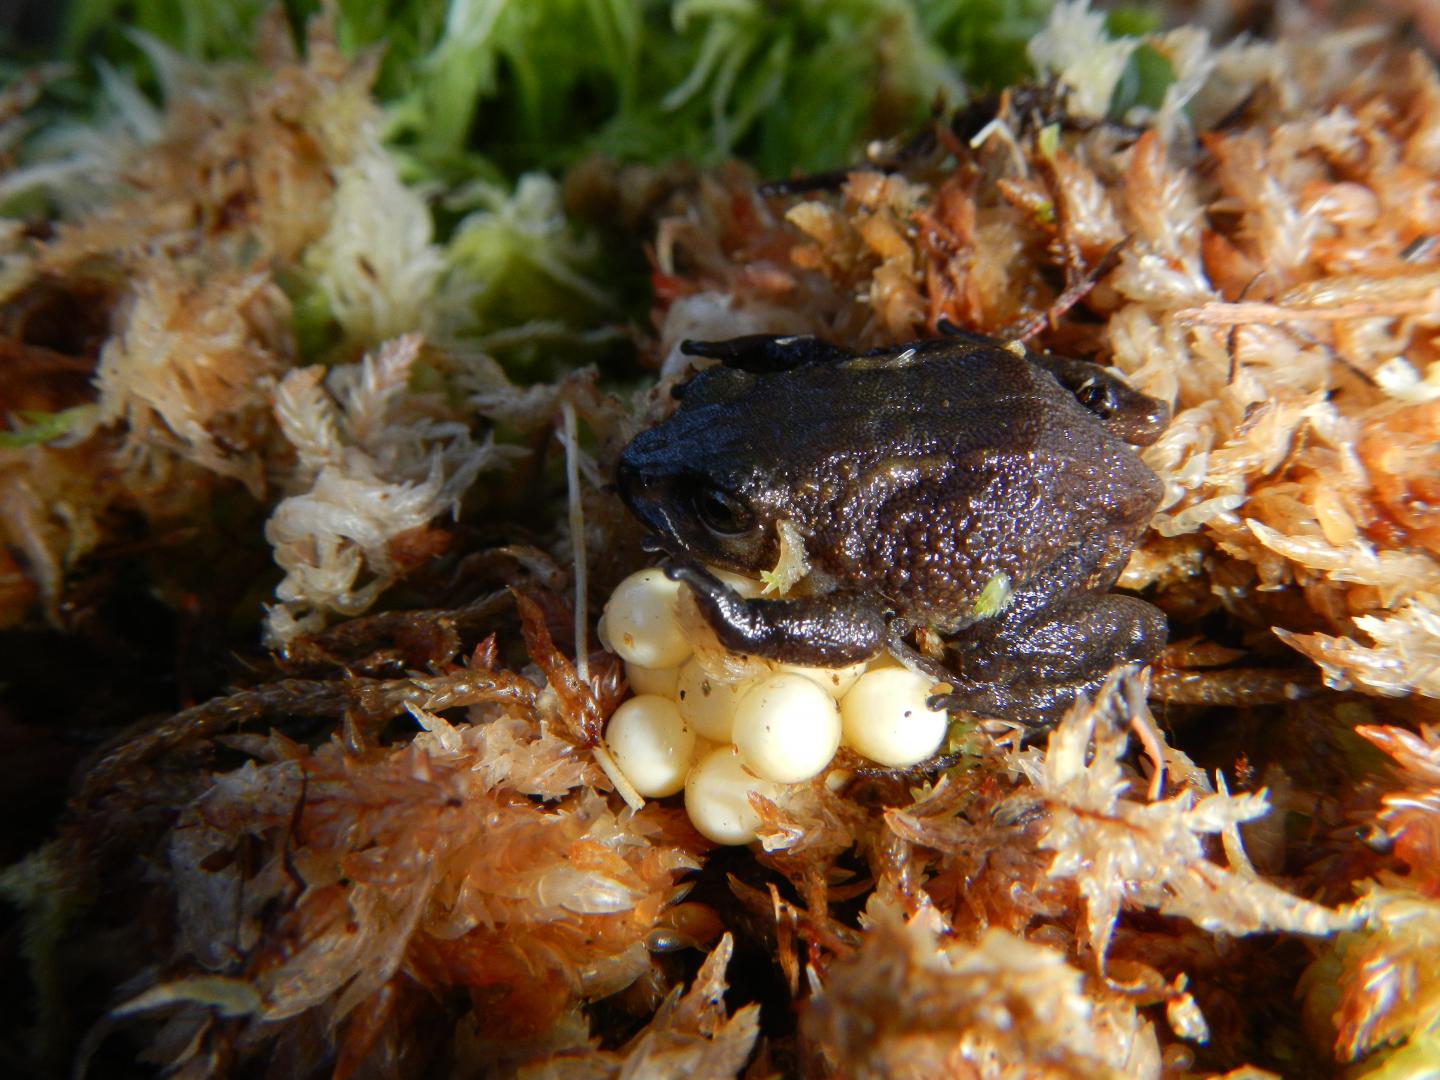 Female Attenborough's Rubber Frog Guarding Eggs in a Moss Pad